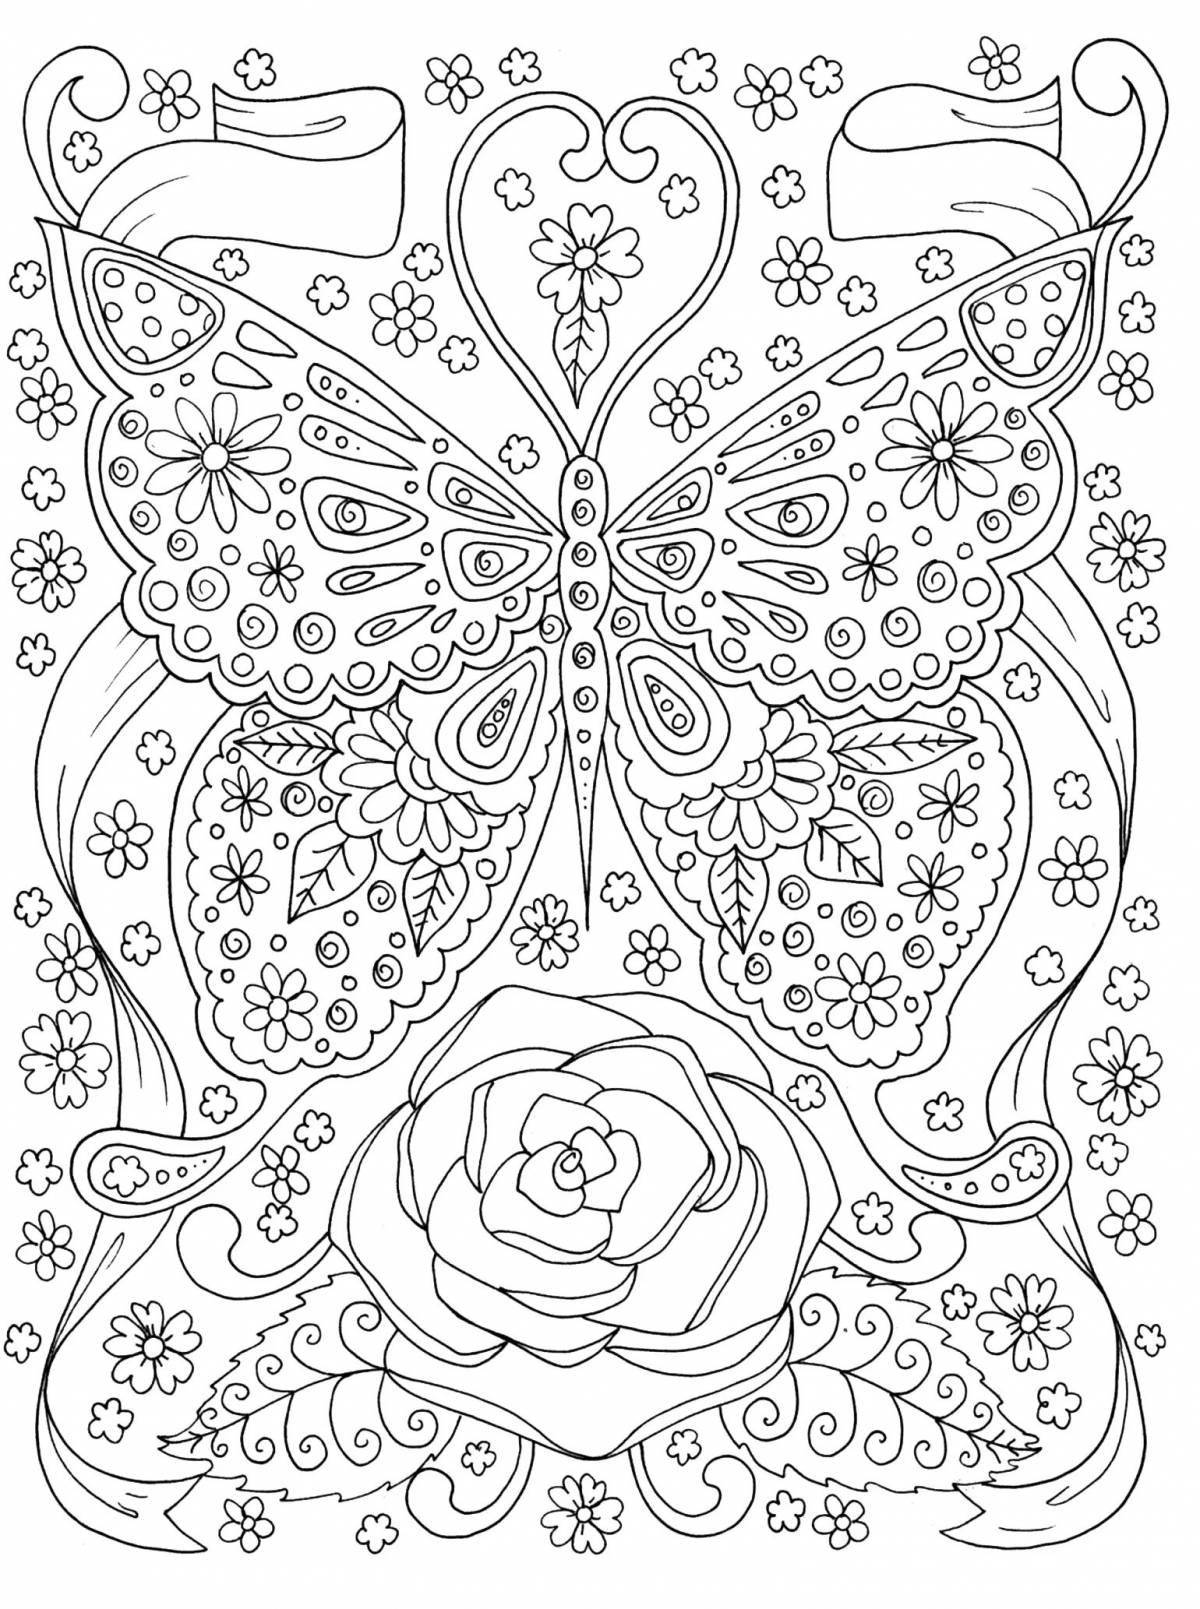 A fascinating anti-stress butterfly coloring book